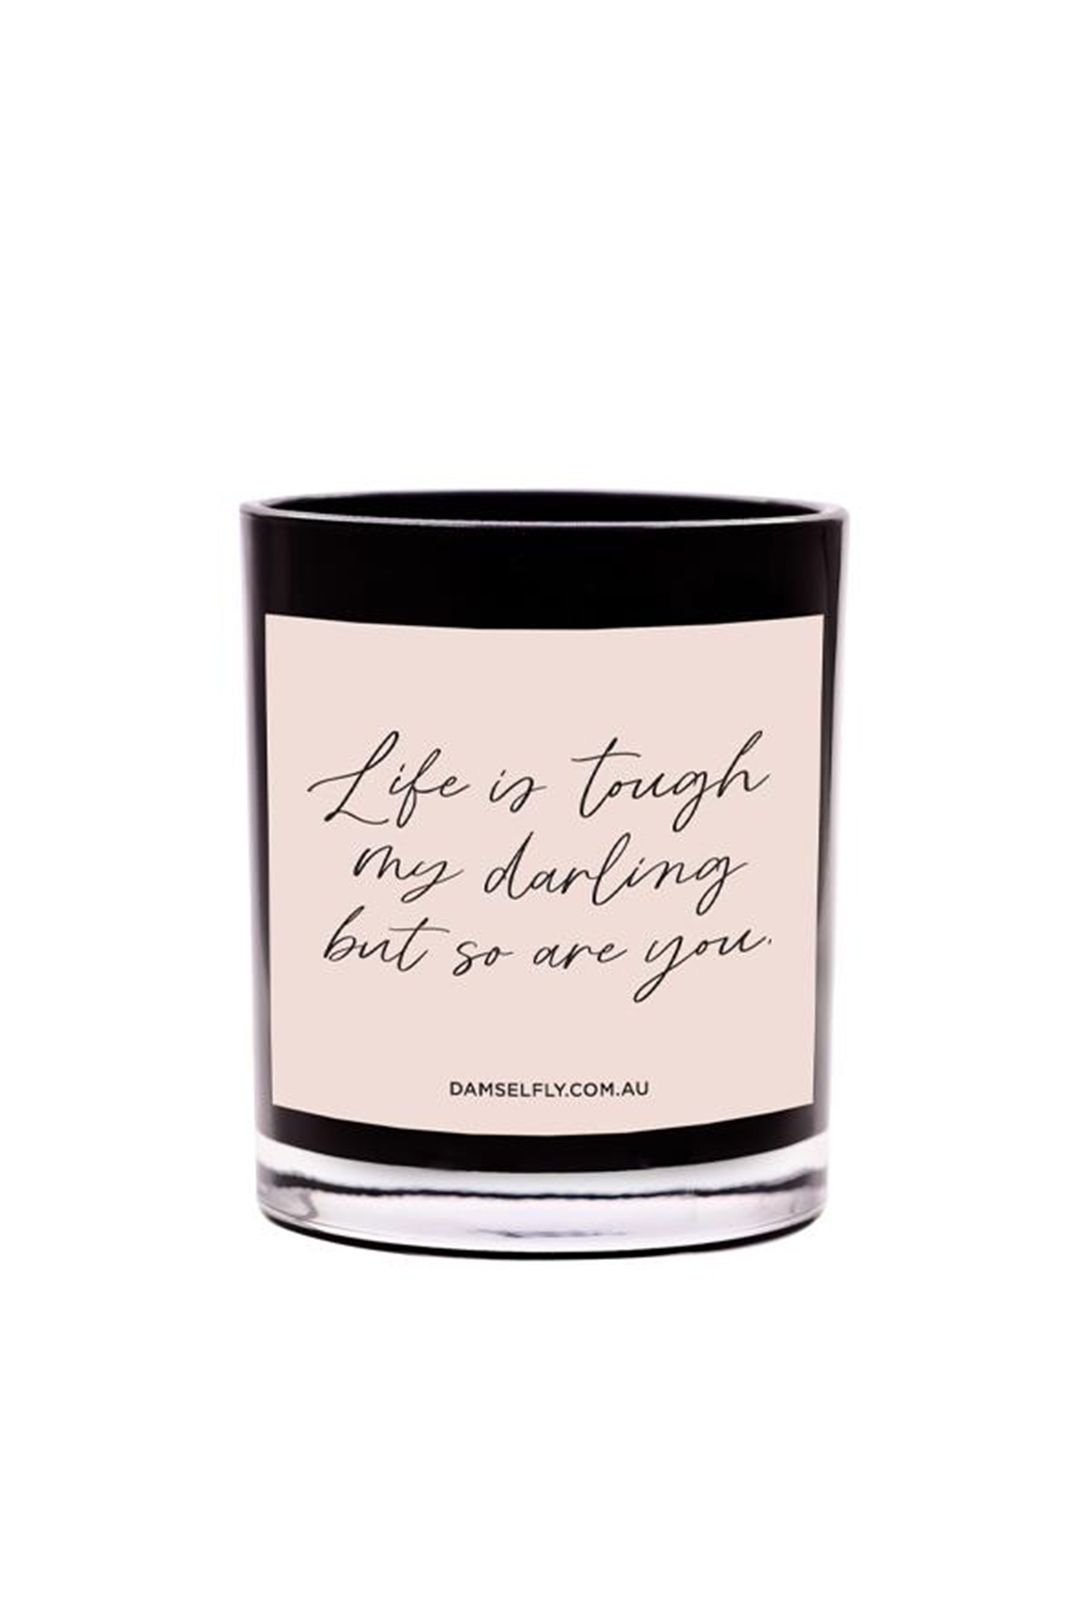 damselfly-collective-life-is-tough-large-candle-front